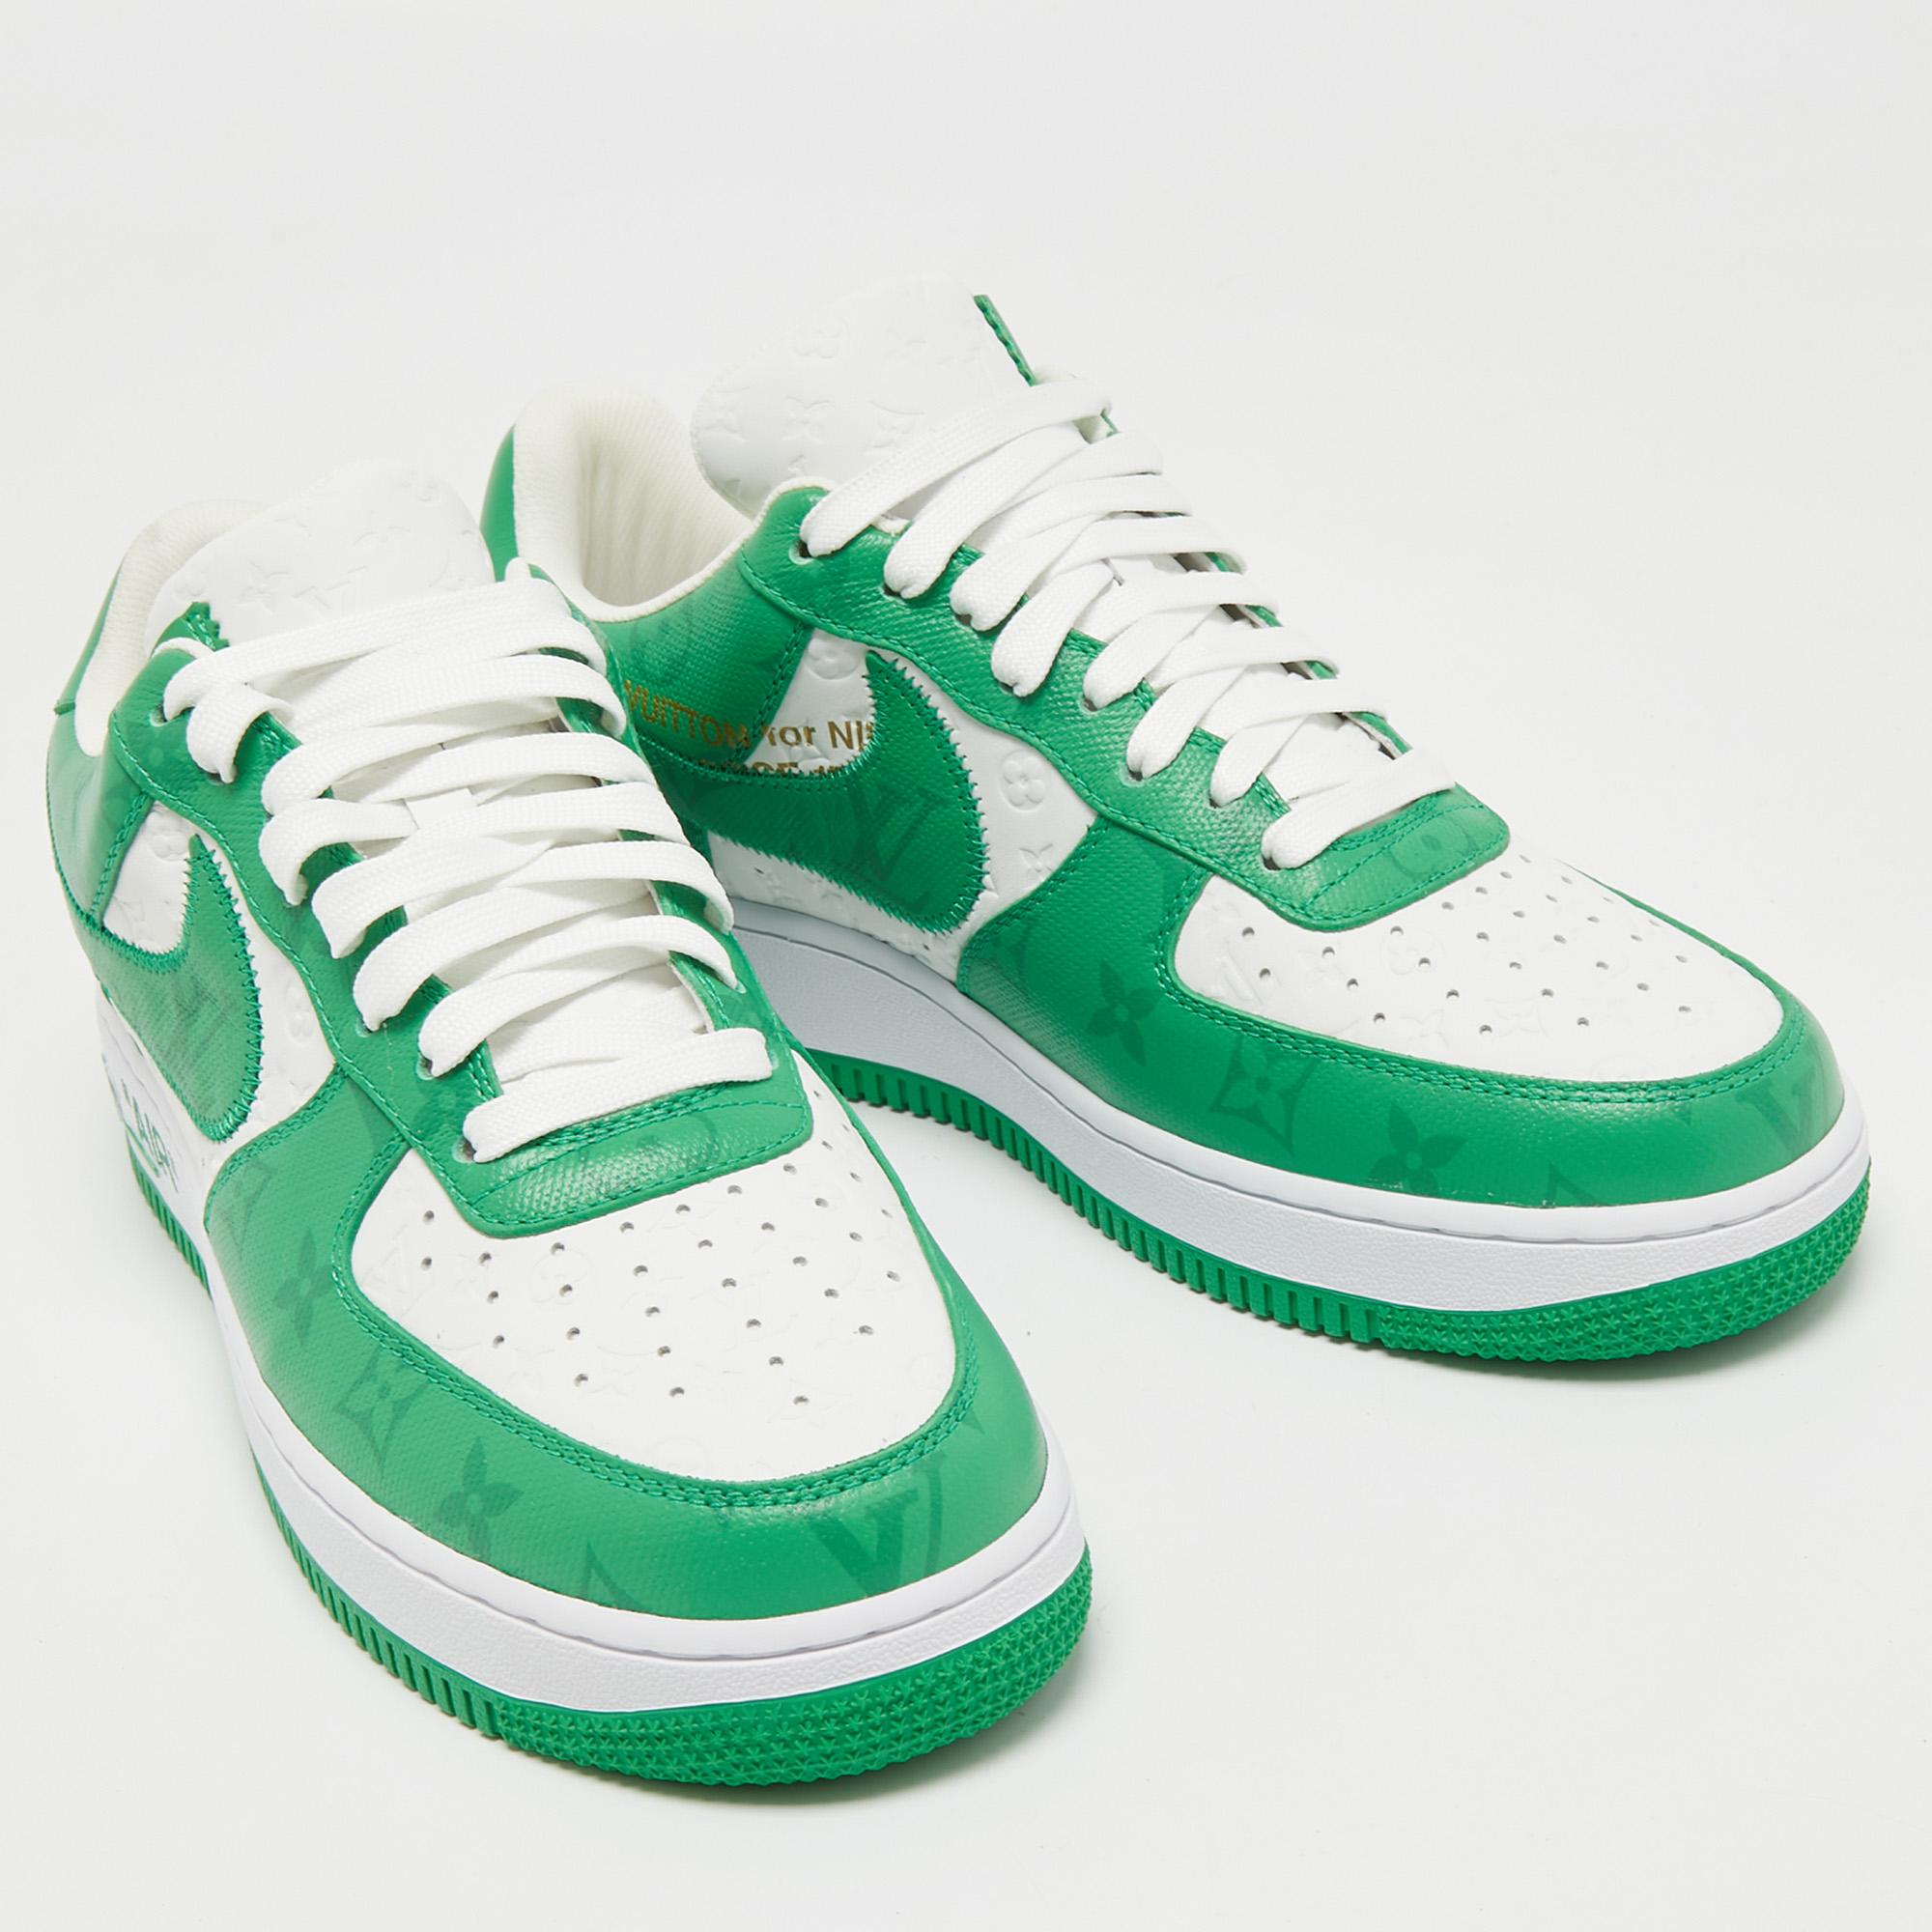 Men's Louis Vuitton x Nike Air Force 1 Low Green Leather Sneakers Size 41